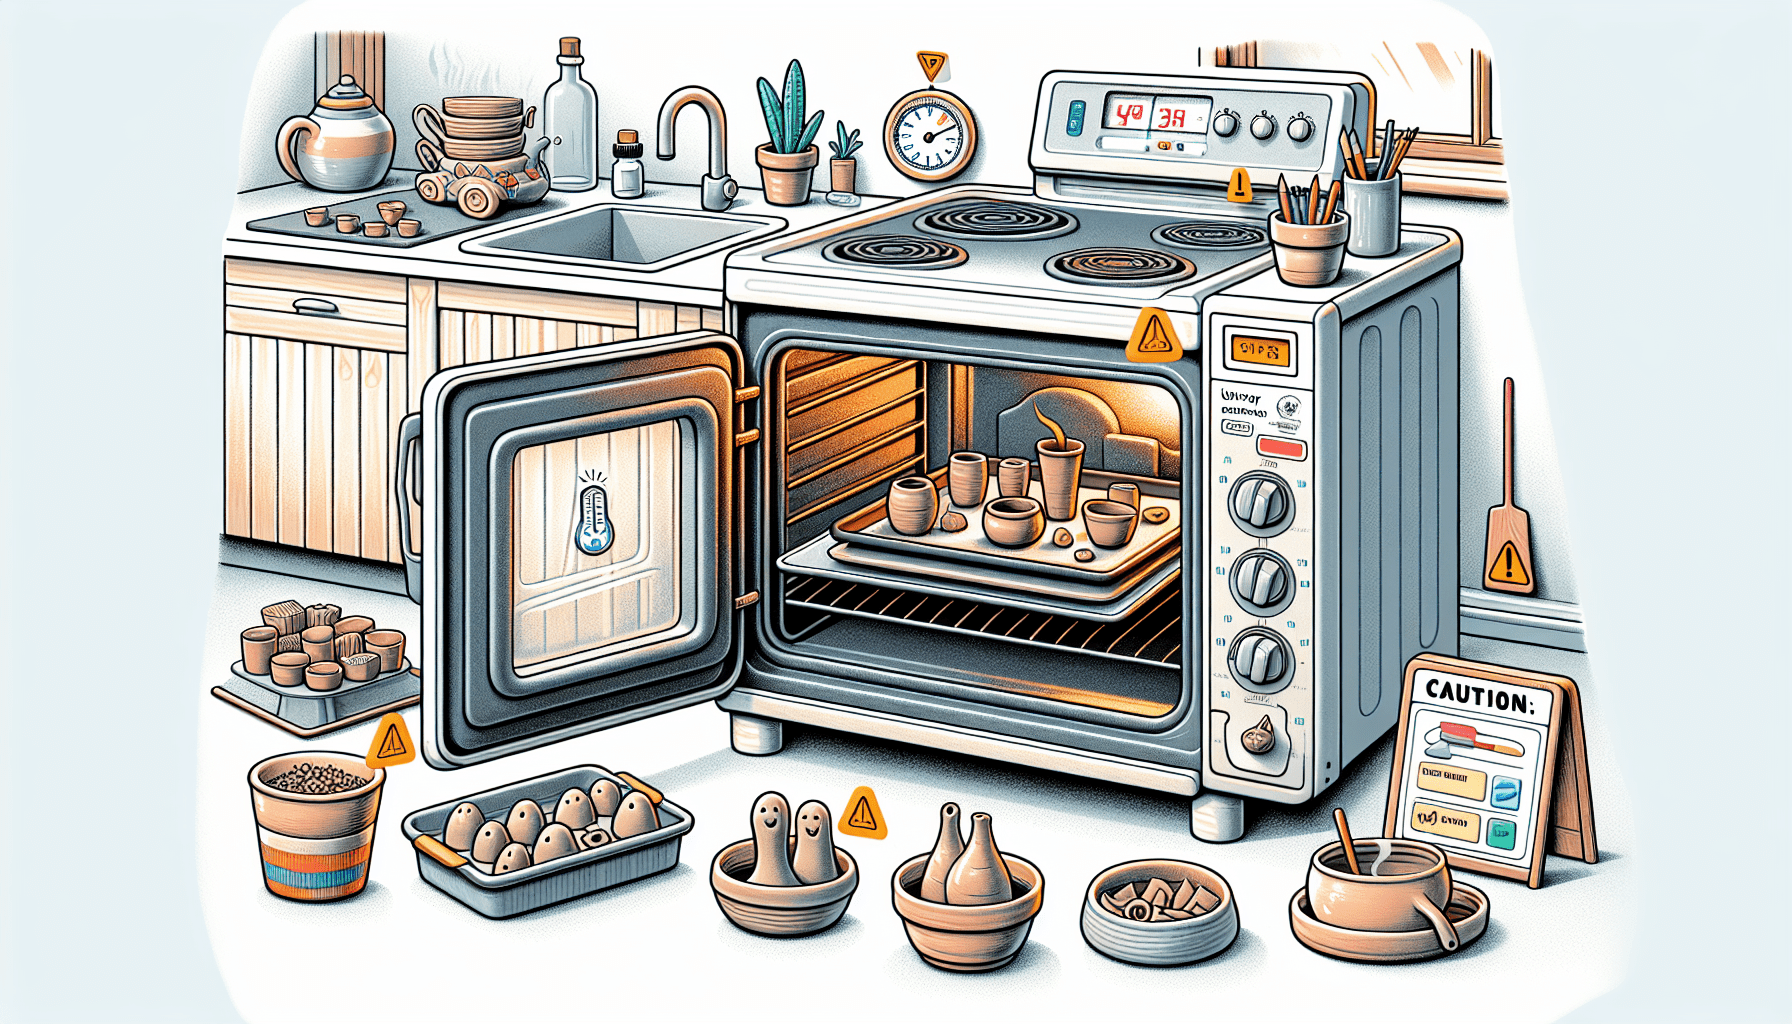 Can You Use A Normal Oven For Clay?